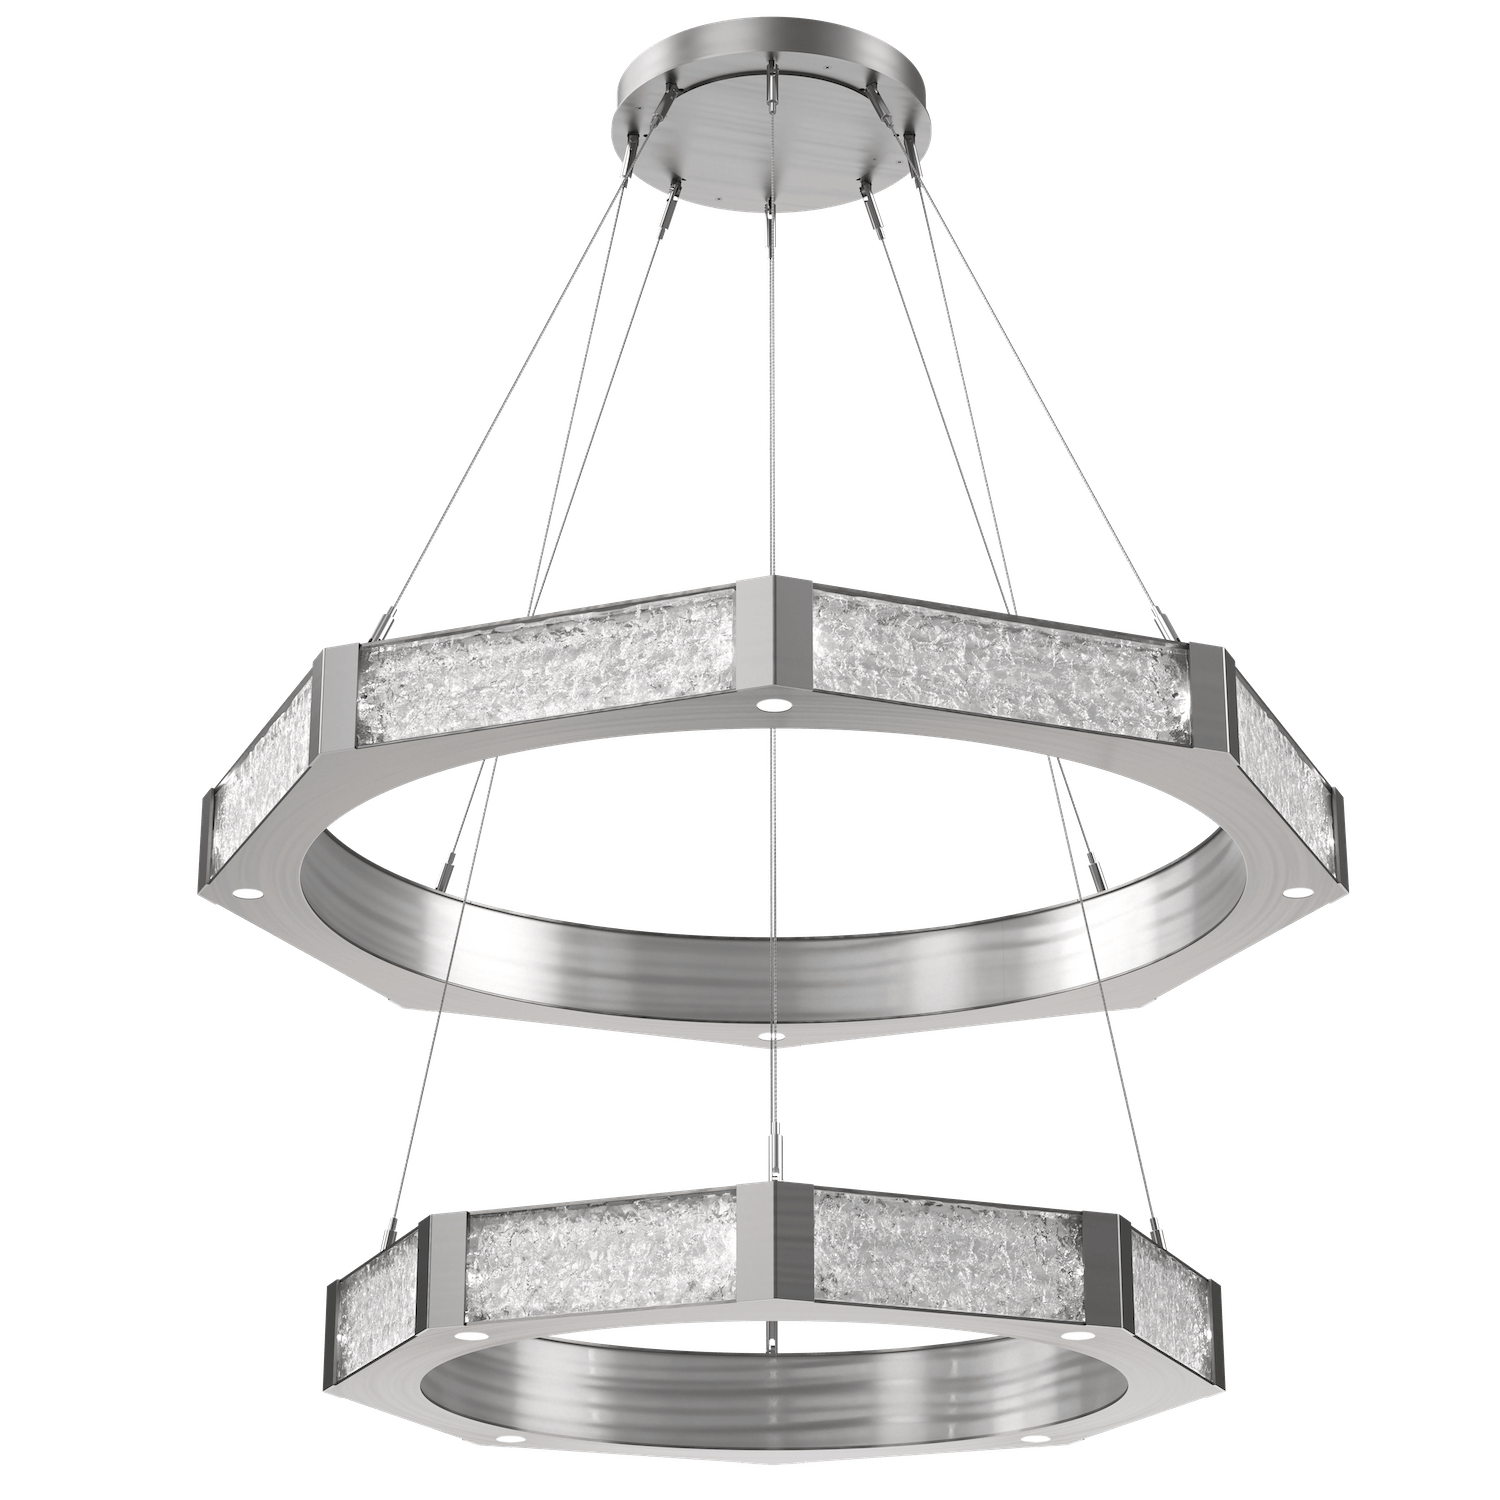 CHB0061-2B-SN-GC-Hammerton-Studio-Glacier-48-inch-two-tier-ring-chandelier-with-satin-nickel-finish-and-clear-blown-glass-with-geo-clear-cast-glass-diffusers-and-LED-lamping